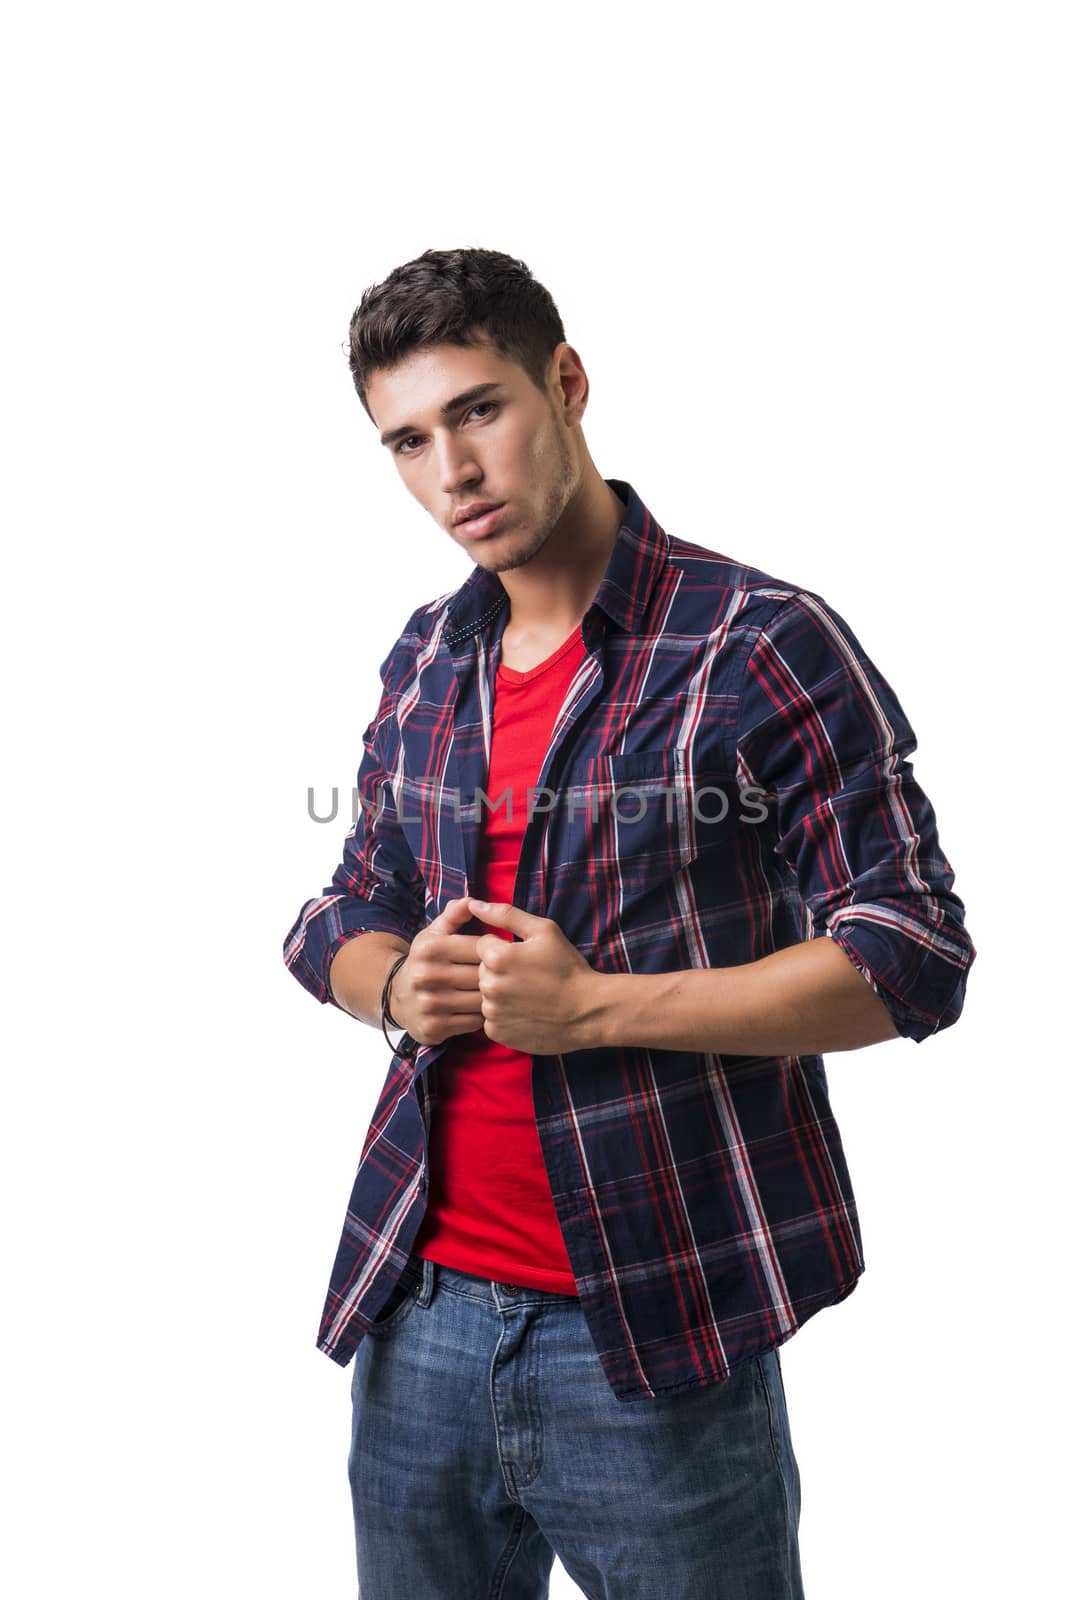 Serious young man looking at camera isolated in white background by artofphoto